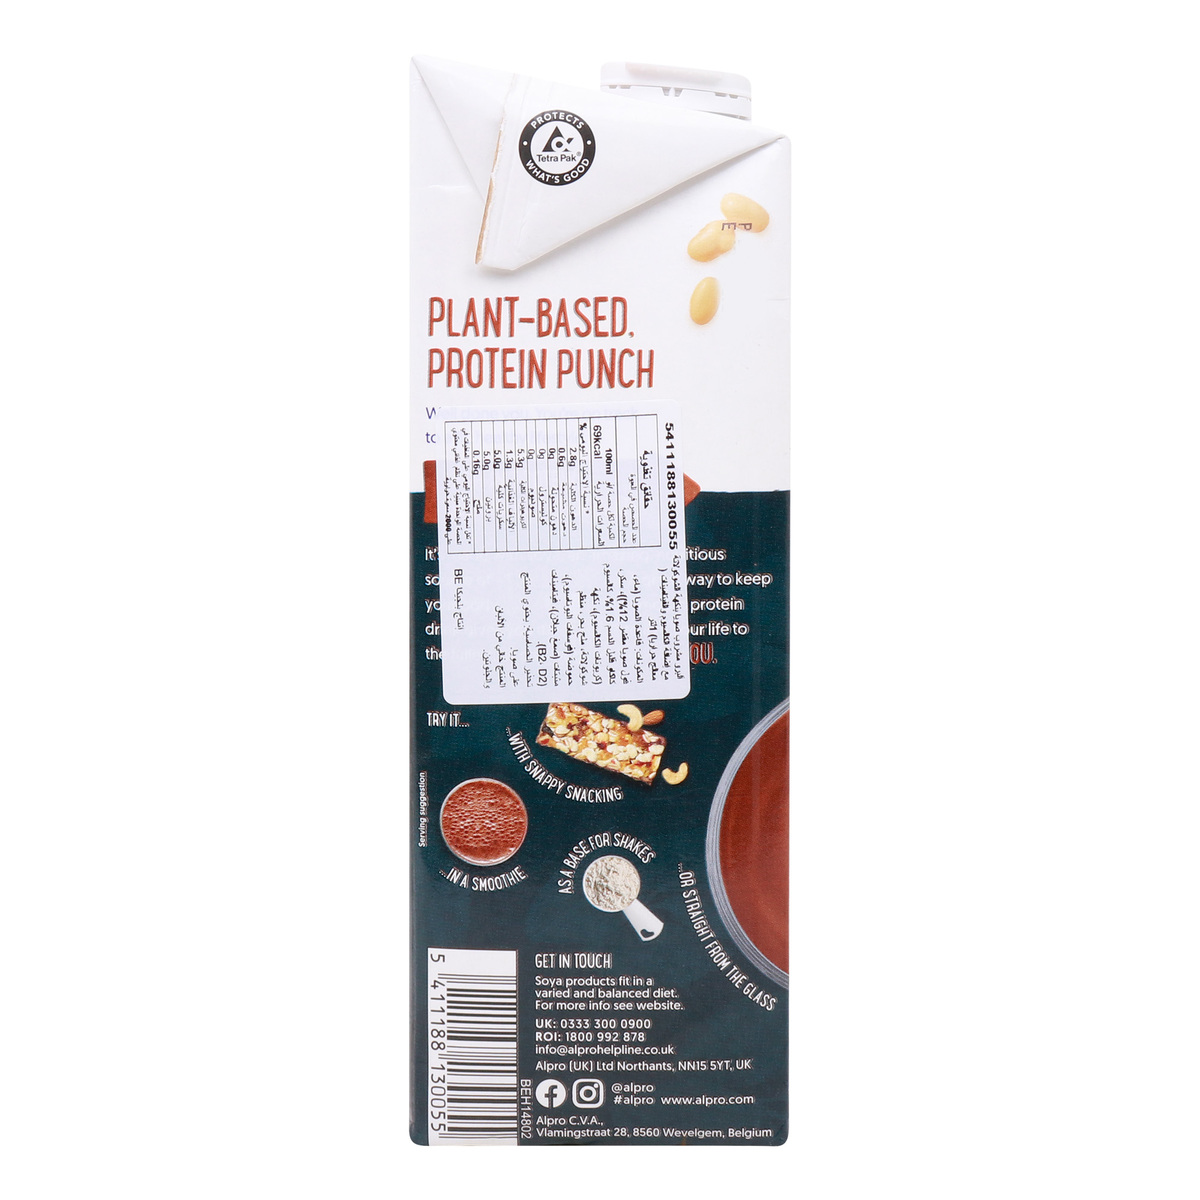 New Alpro protein products! –